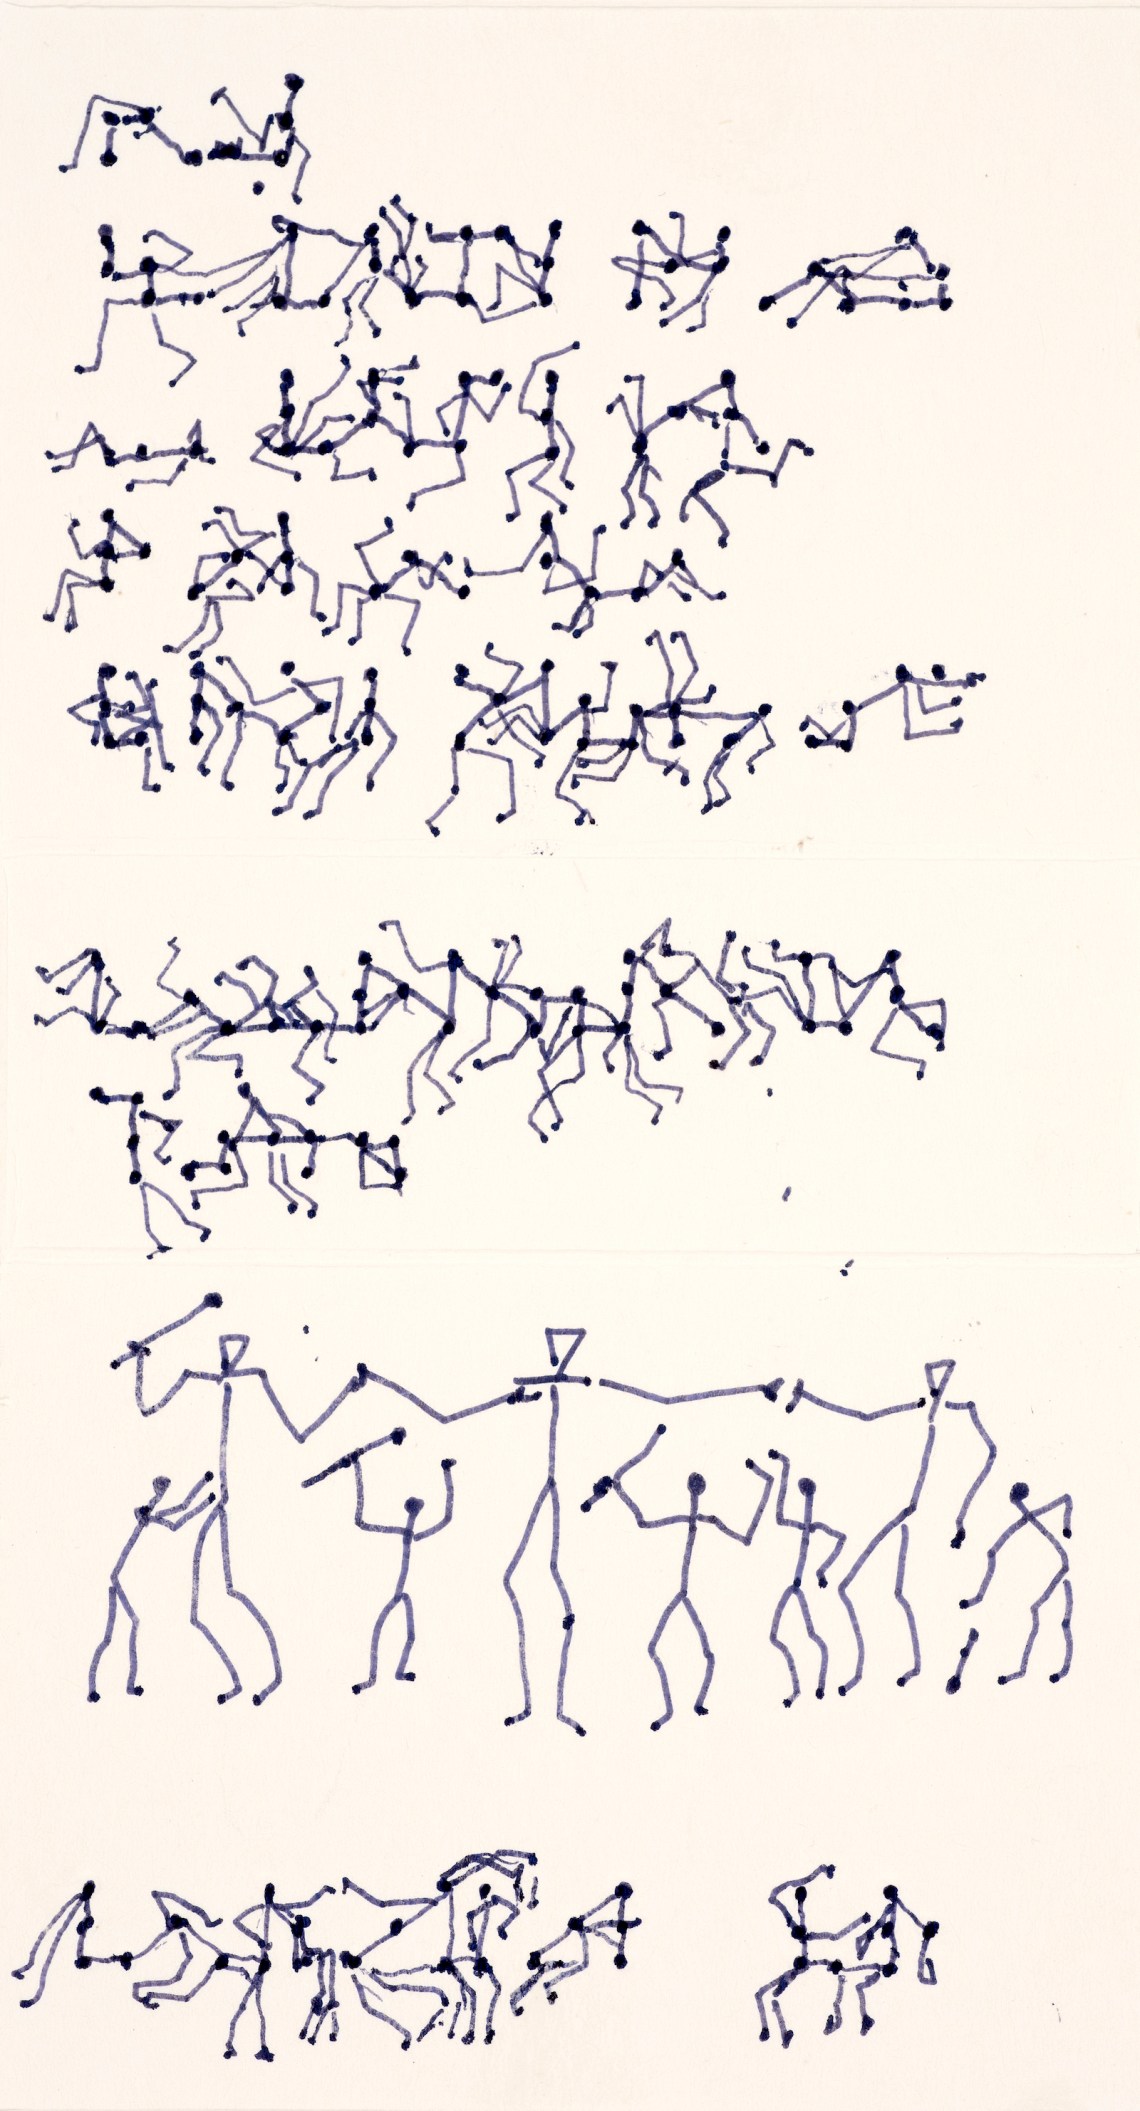 A drawing of many small human stick figures interacting